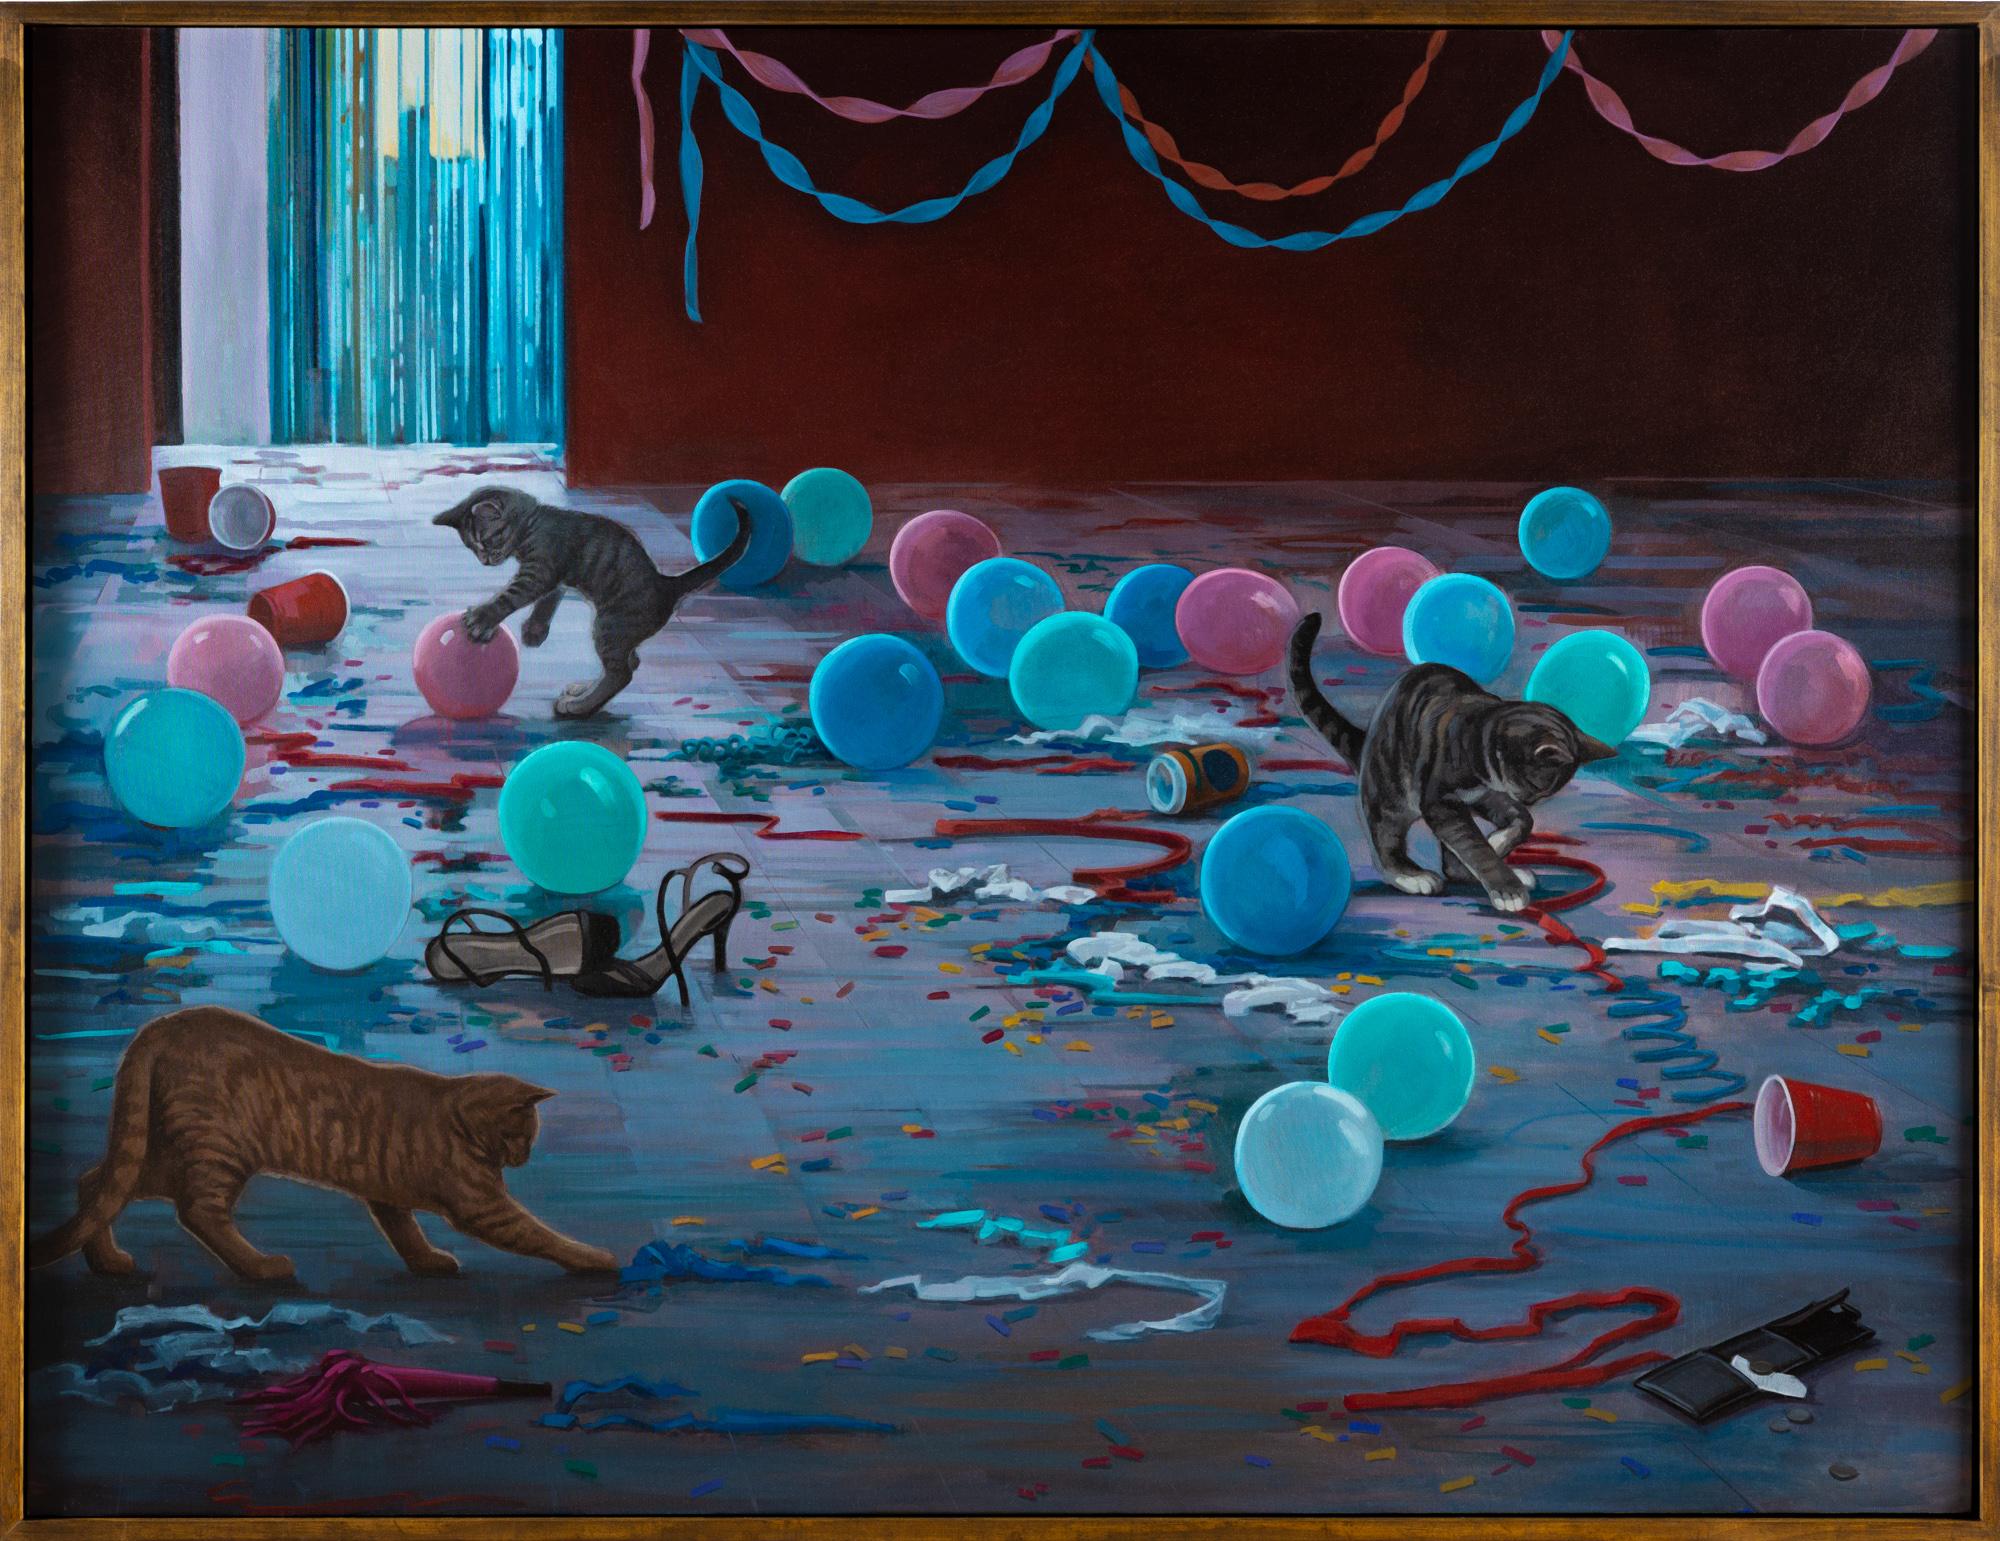 Katherine Fraser Interior Painting - "Abundance Mentality" Oil on canvas, cats, balloons, party scene